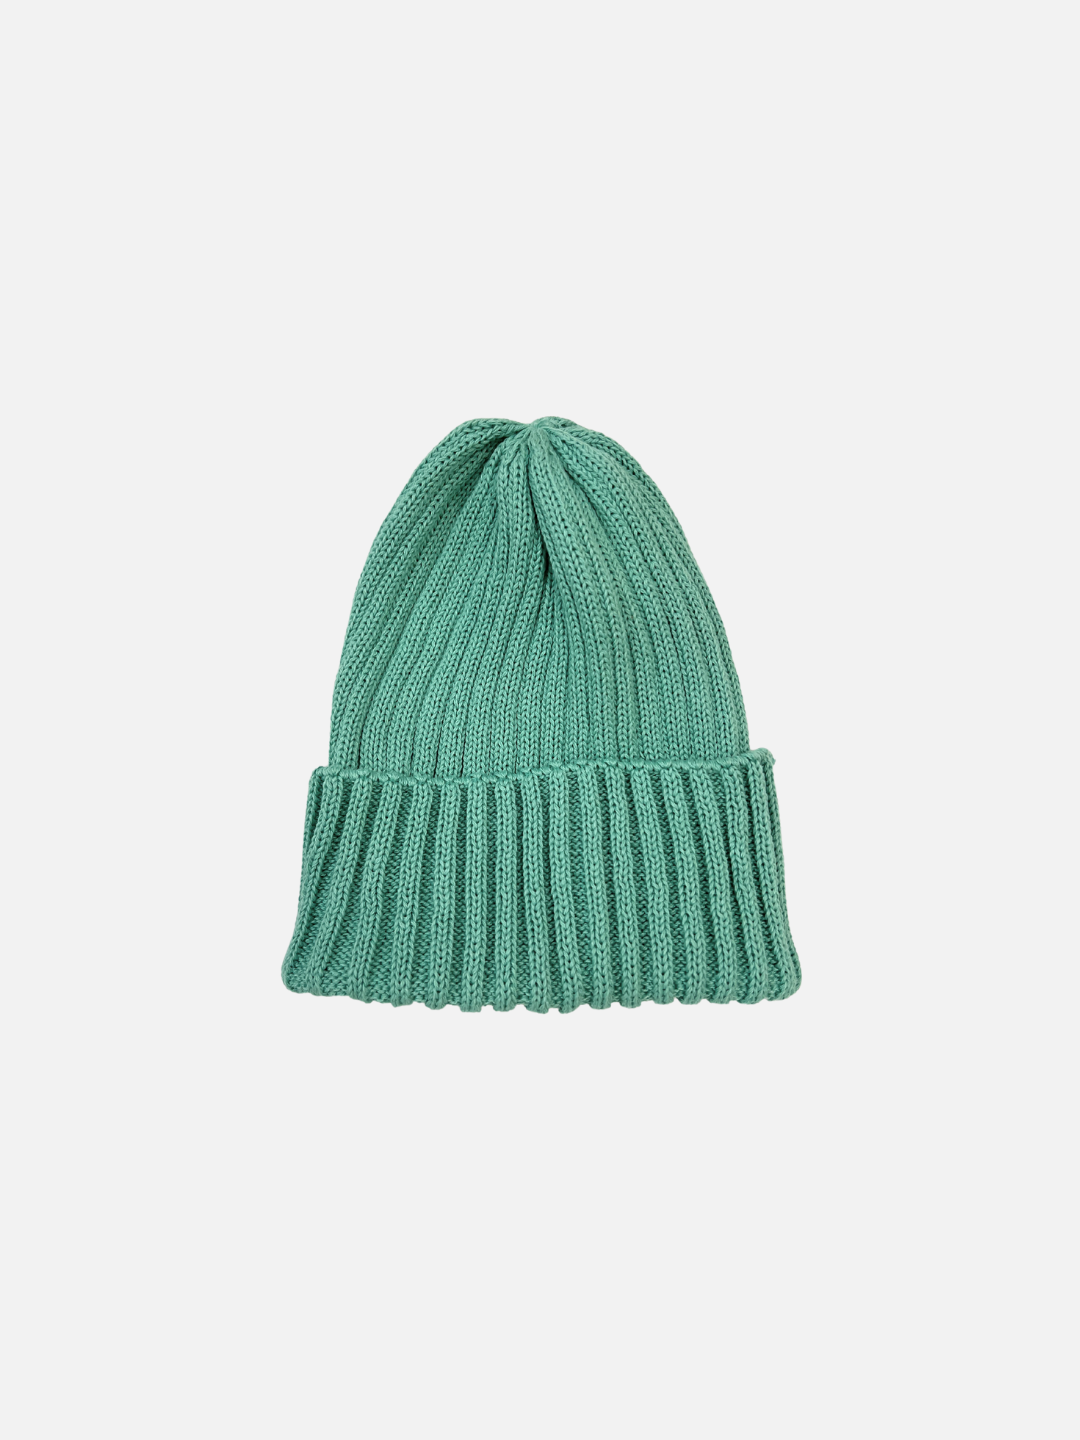 Mint | Front view of the Mint Spring Rib Knit Baby Beanie